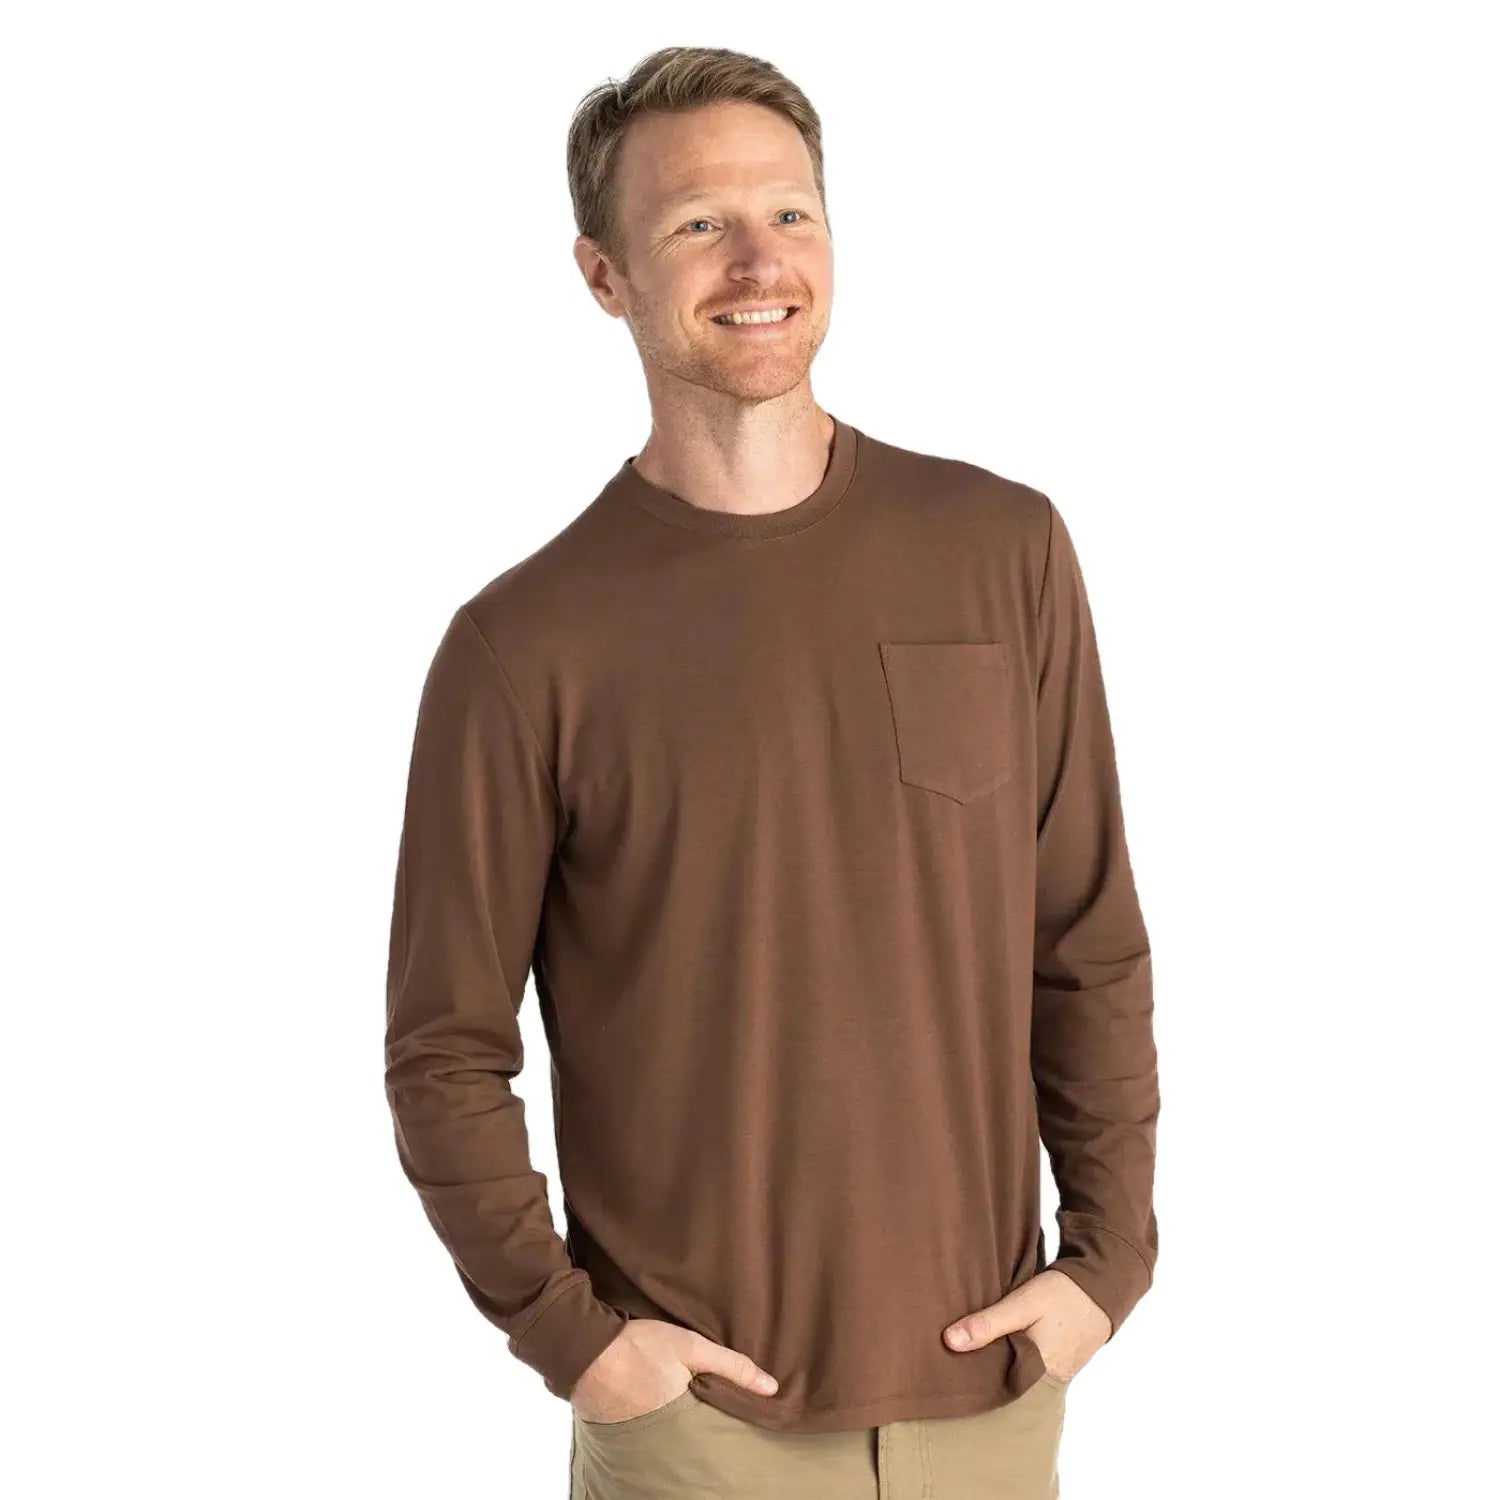 Free Fly M's Bamboo Flex Long Sleeve Pocket Tee, Mustang, front view on model